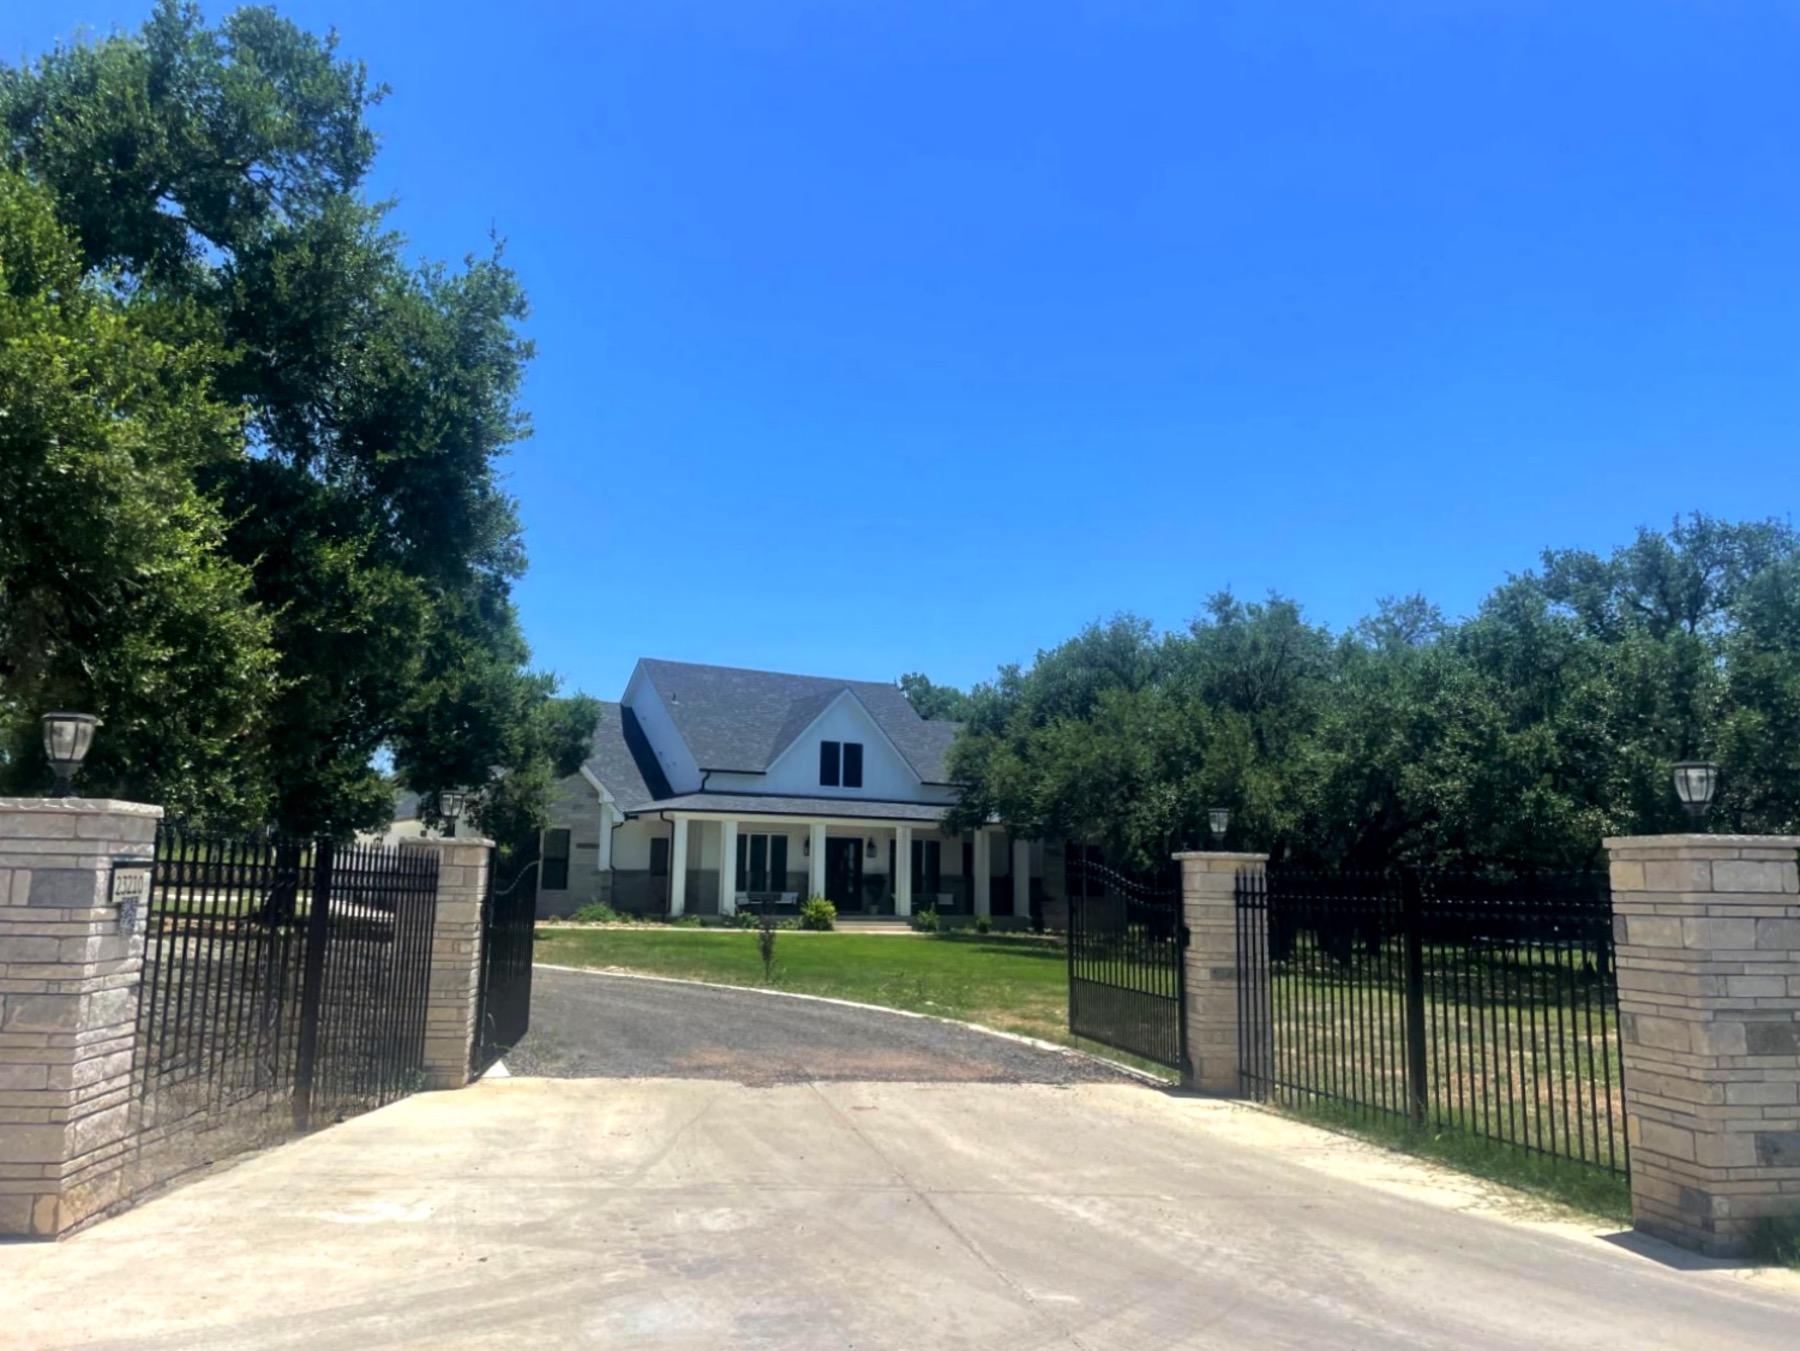 leander neighborhoods with 1 acre lots sandy creek ranches